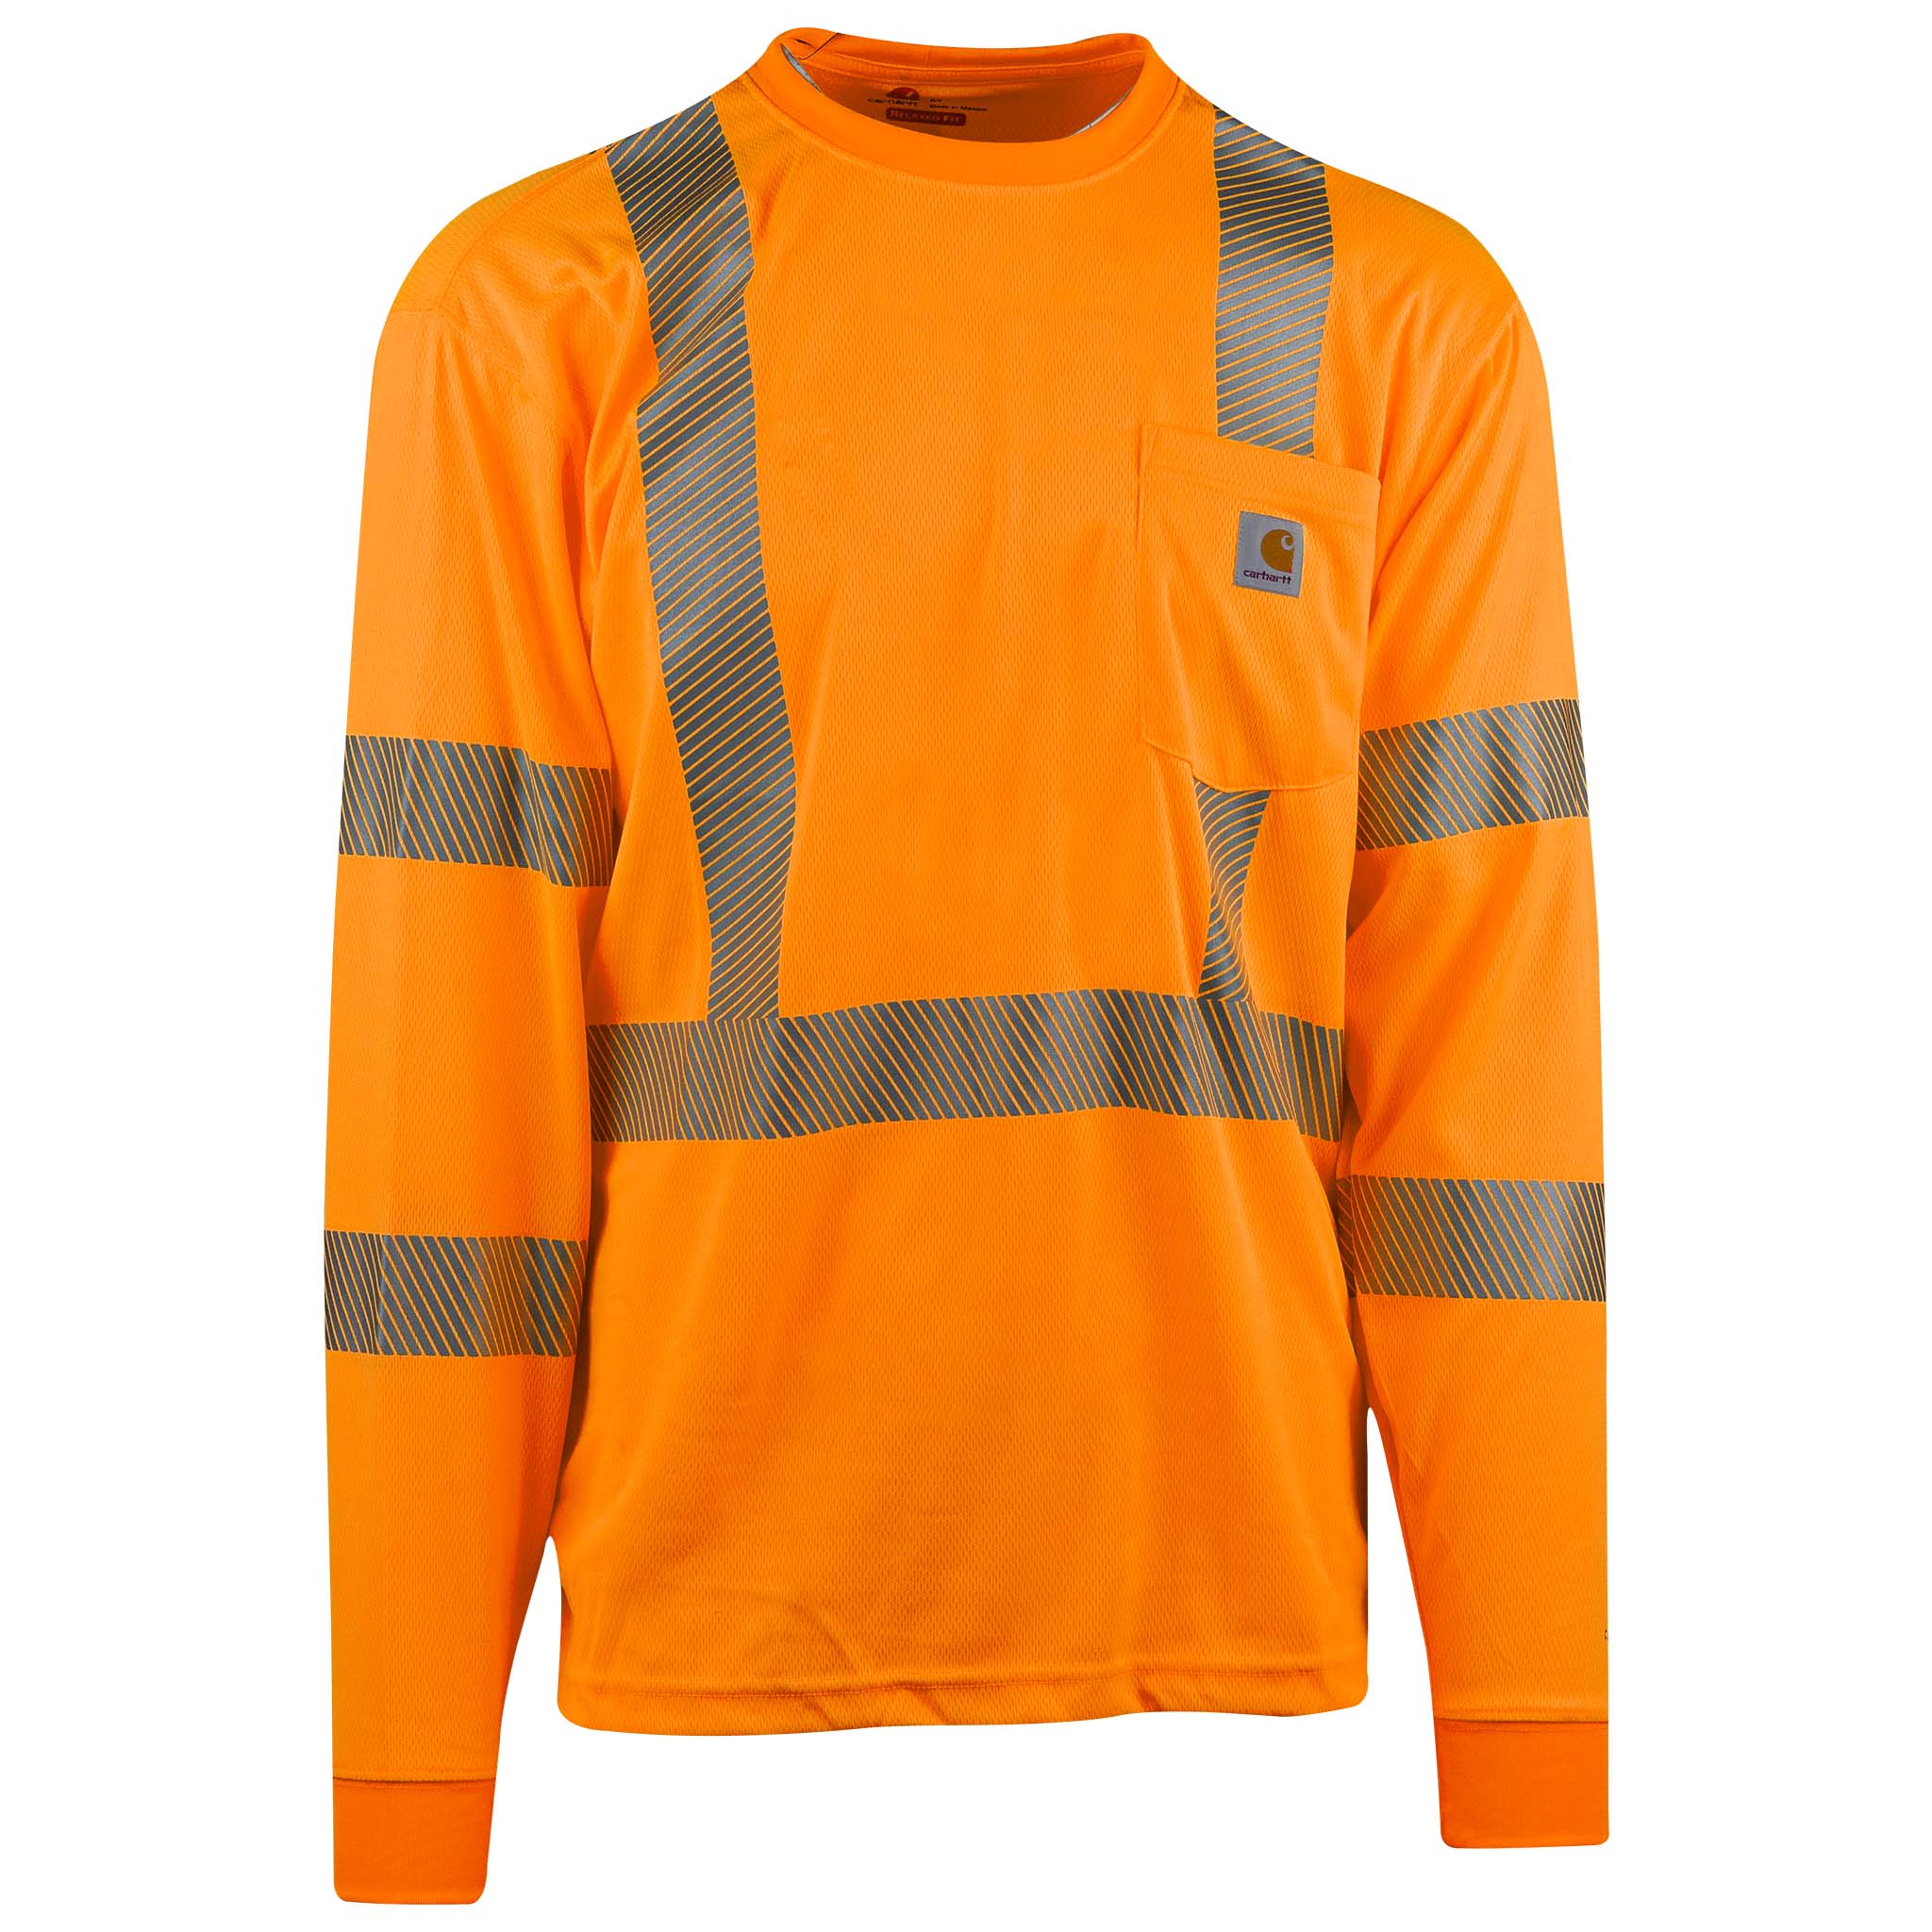 Carhartt L/S High Visibility Class 3 Orange Front